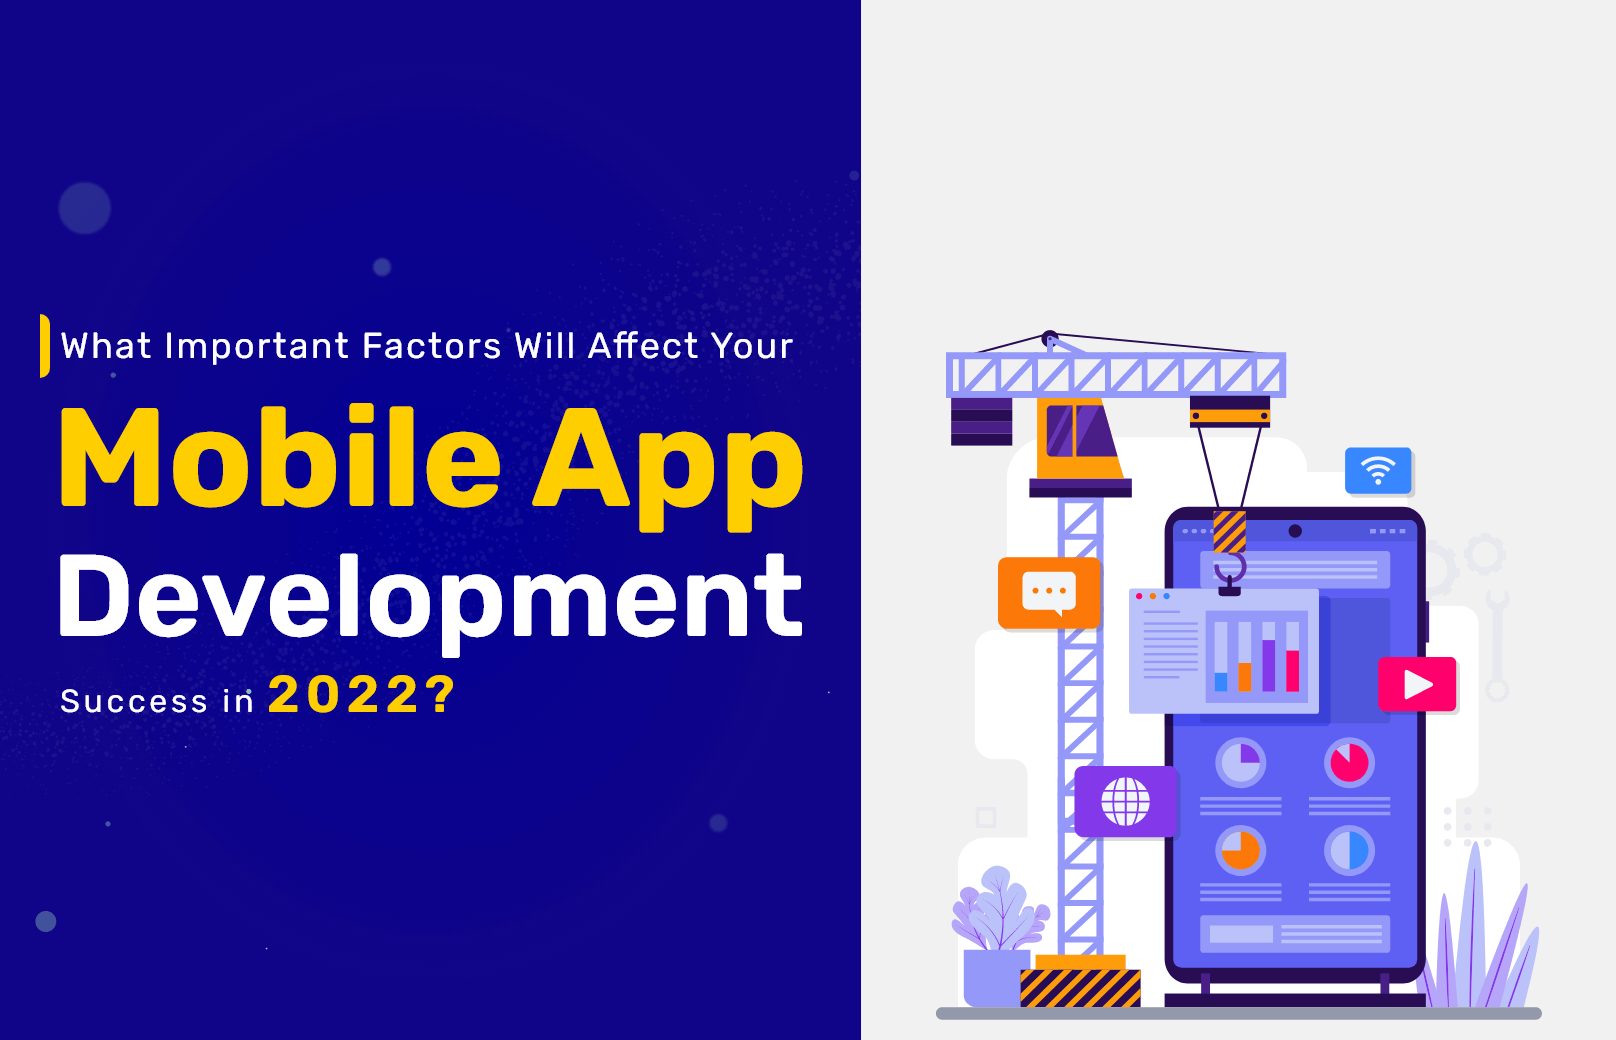 What Important Factors Will Affect Your Mobile App Development Success in 2023?